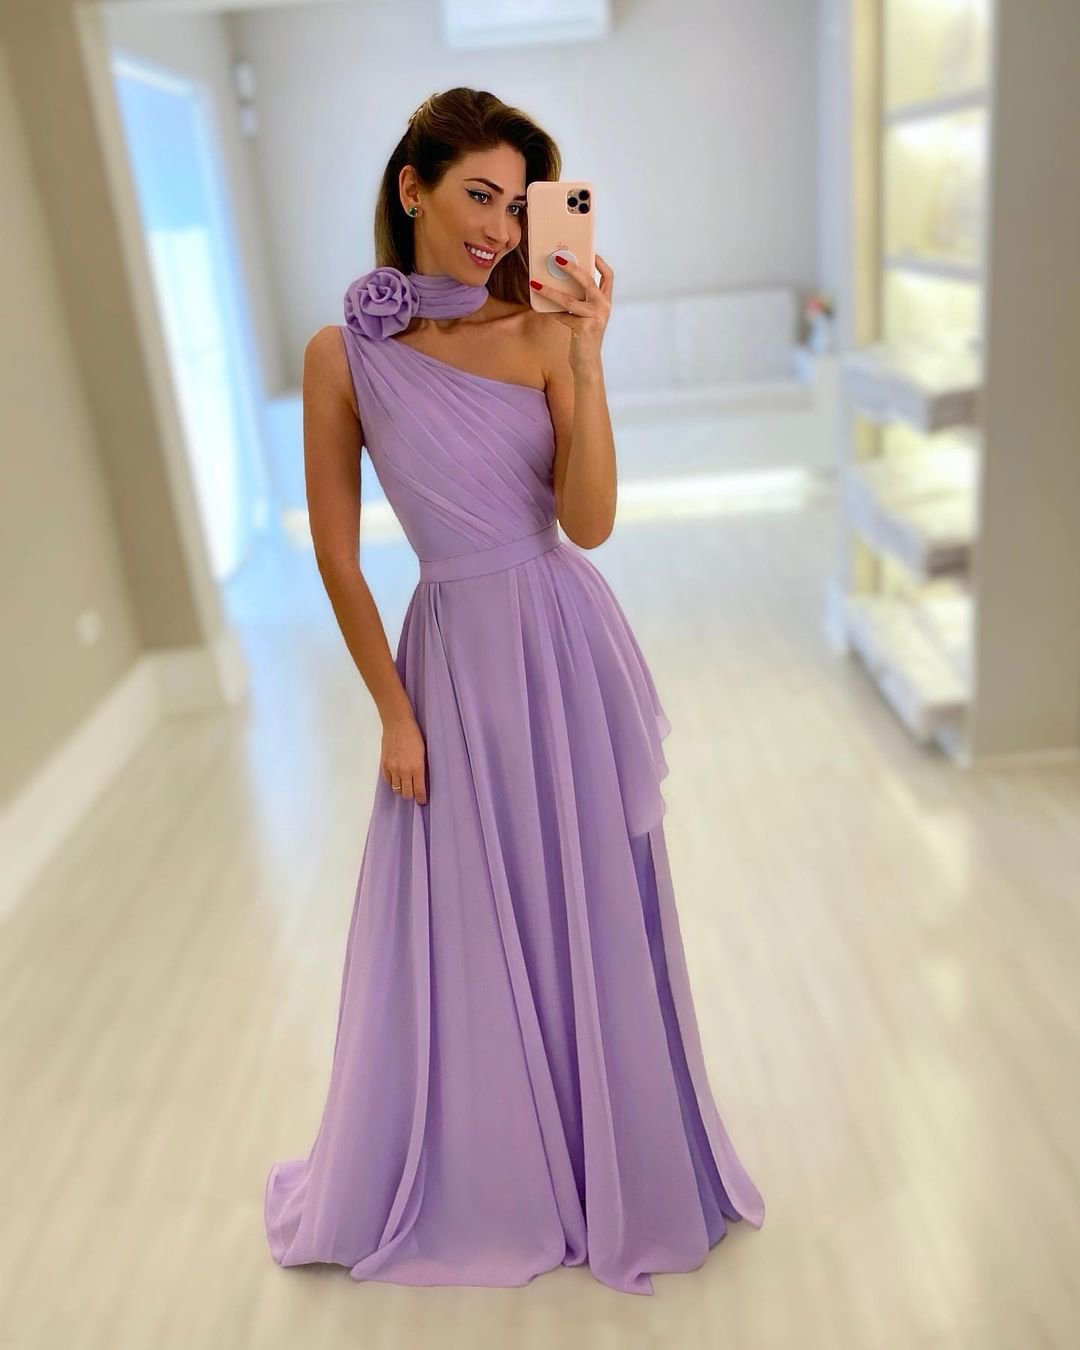 wedding guest outfit simple maxi dress formal isabellanarchi